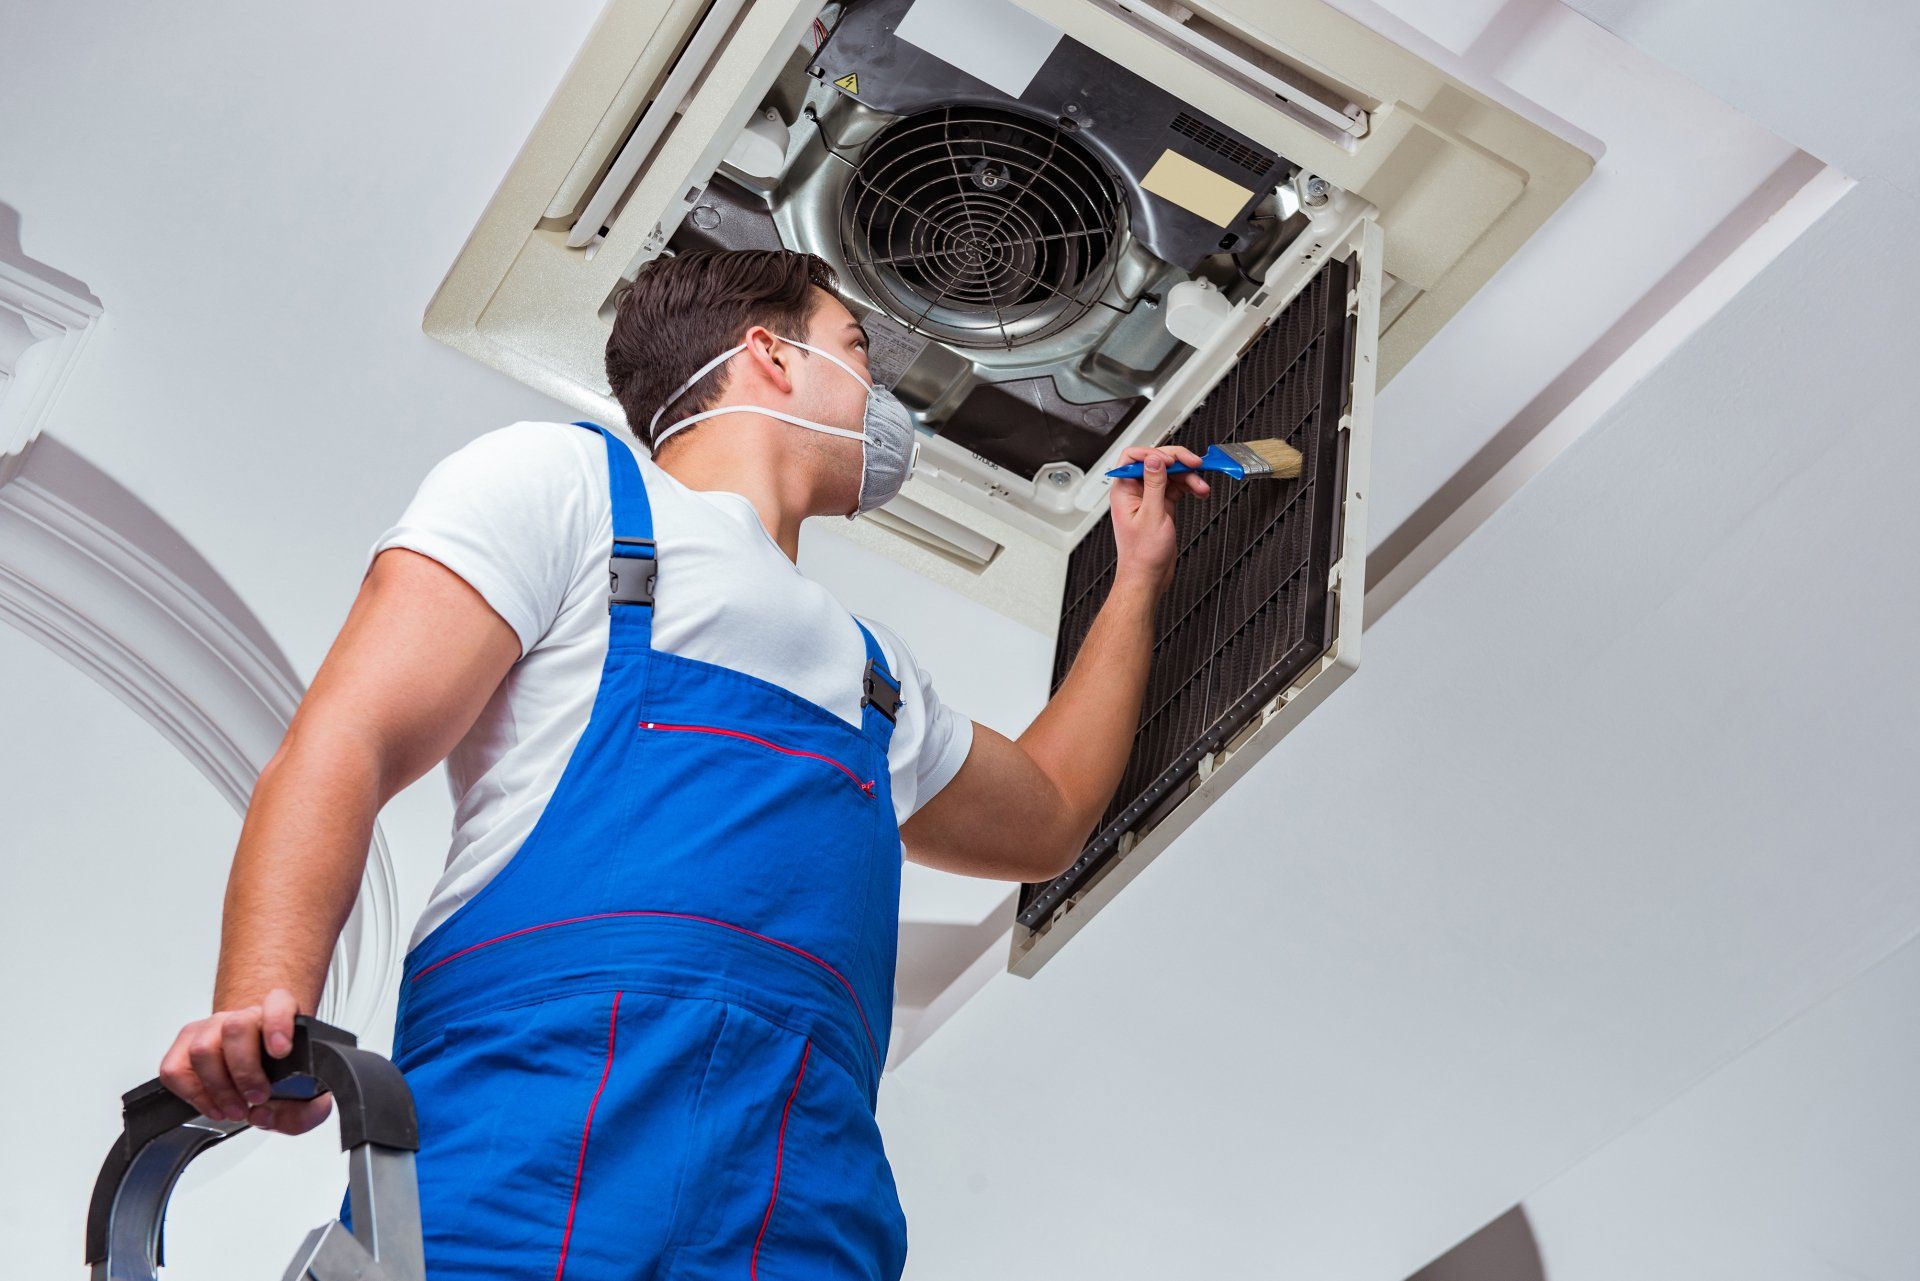 Worker Repairing Ceiling Air Conditioning Unit - Air Conditioning Services in Mackay, QLD